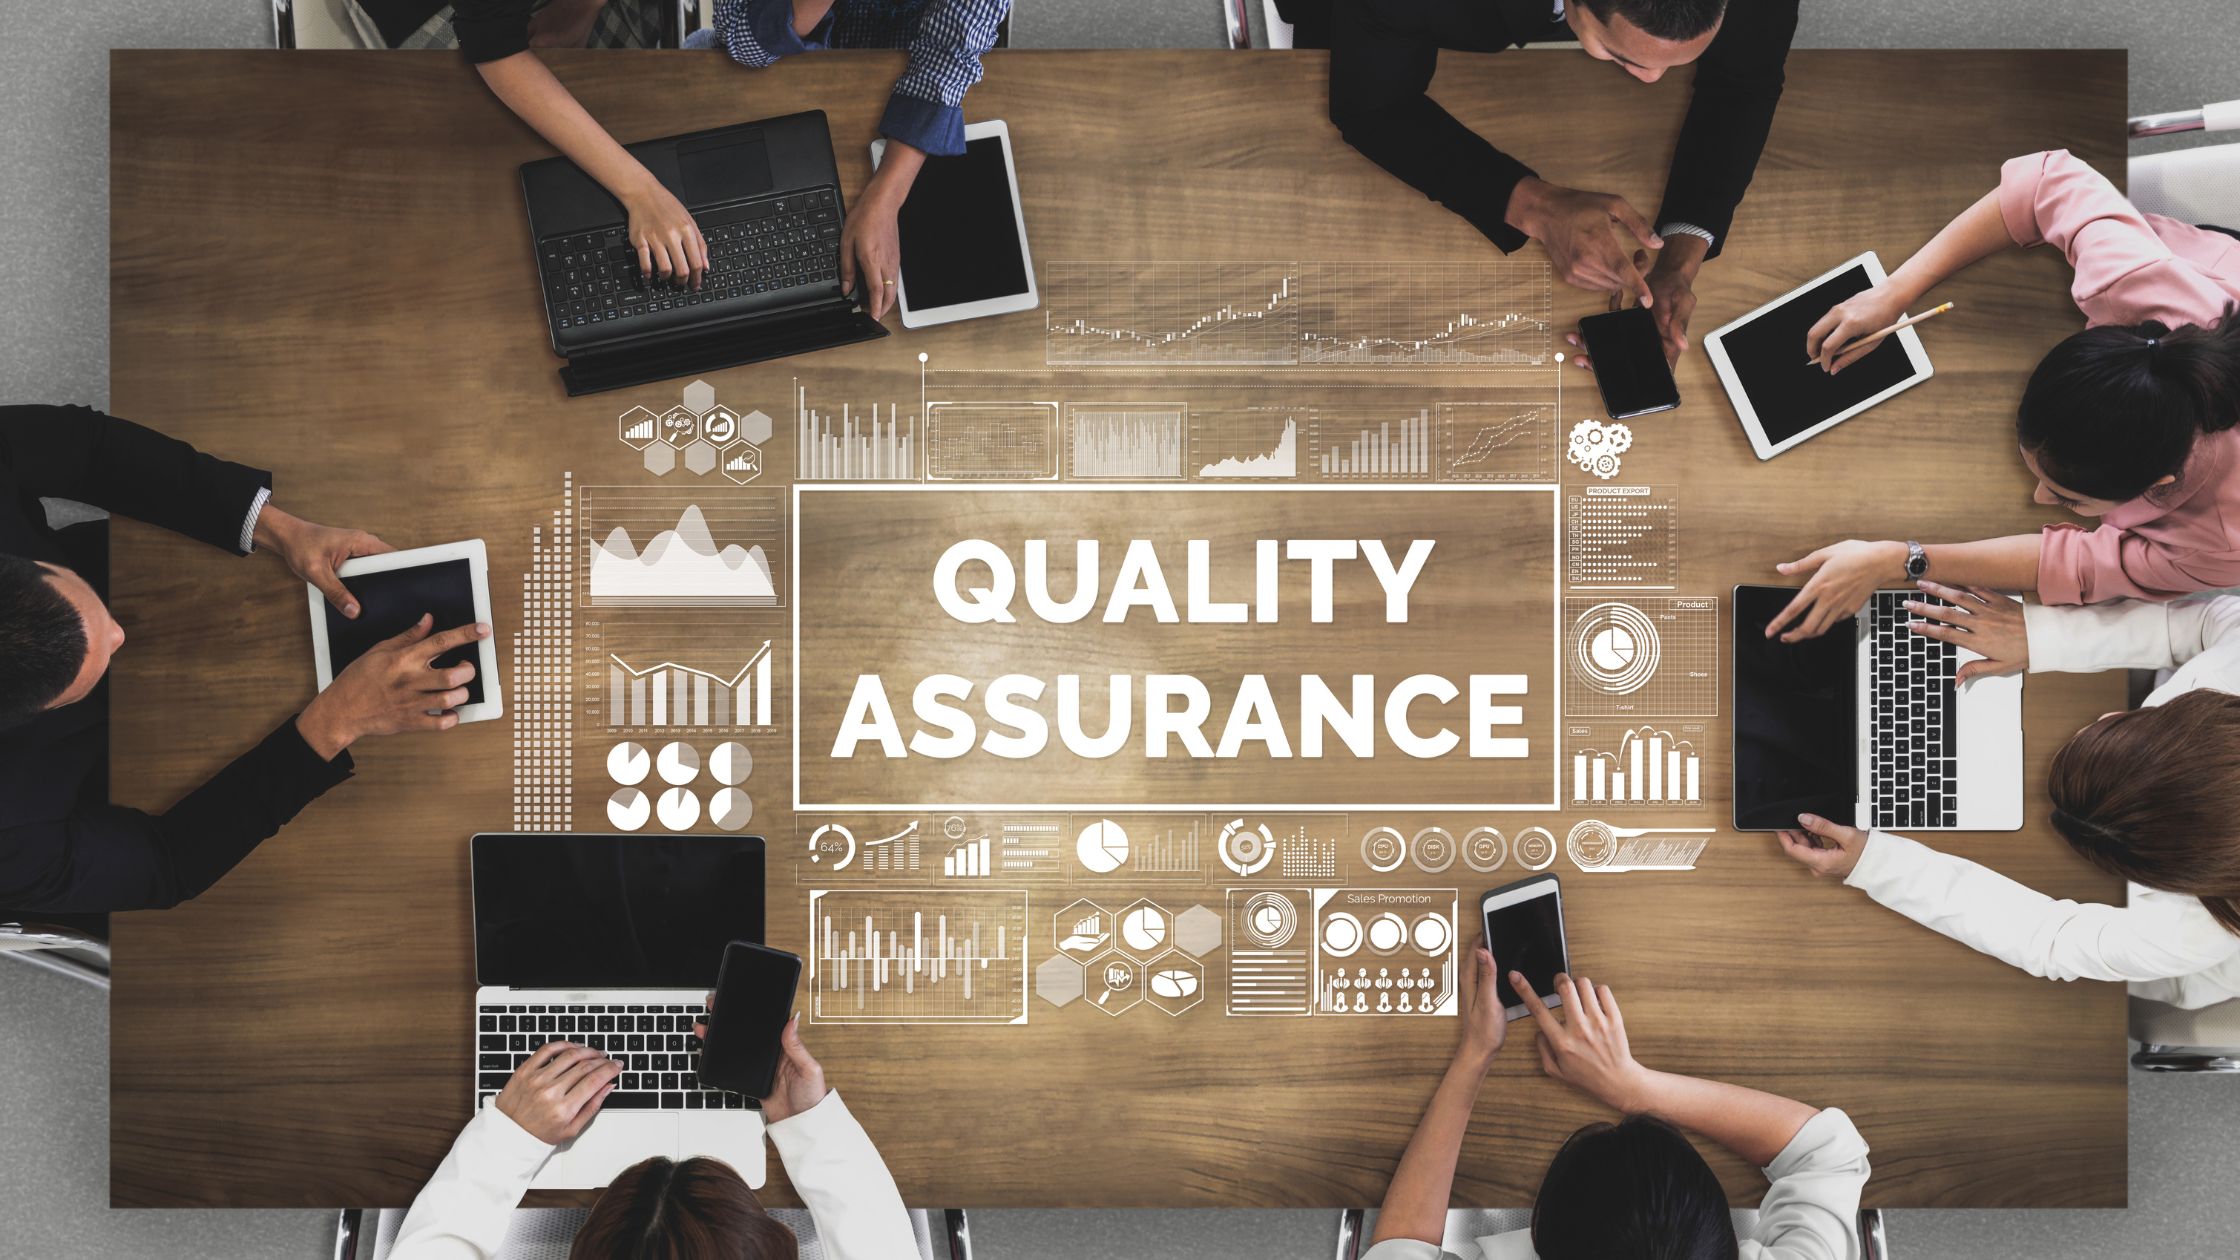 Quality assurance is critical when it comes to IT development.